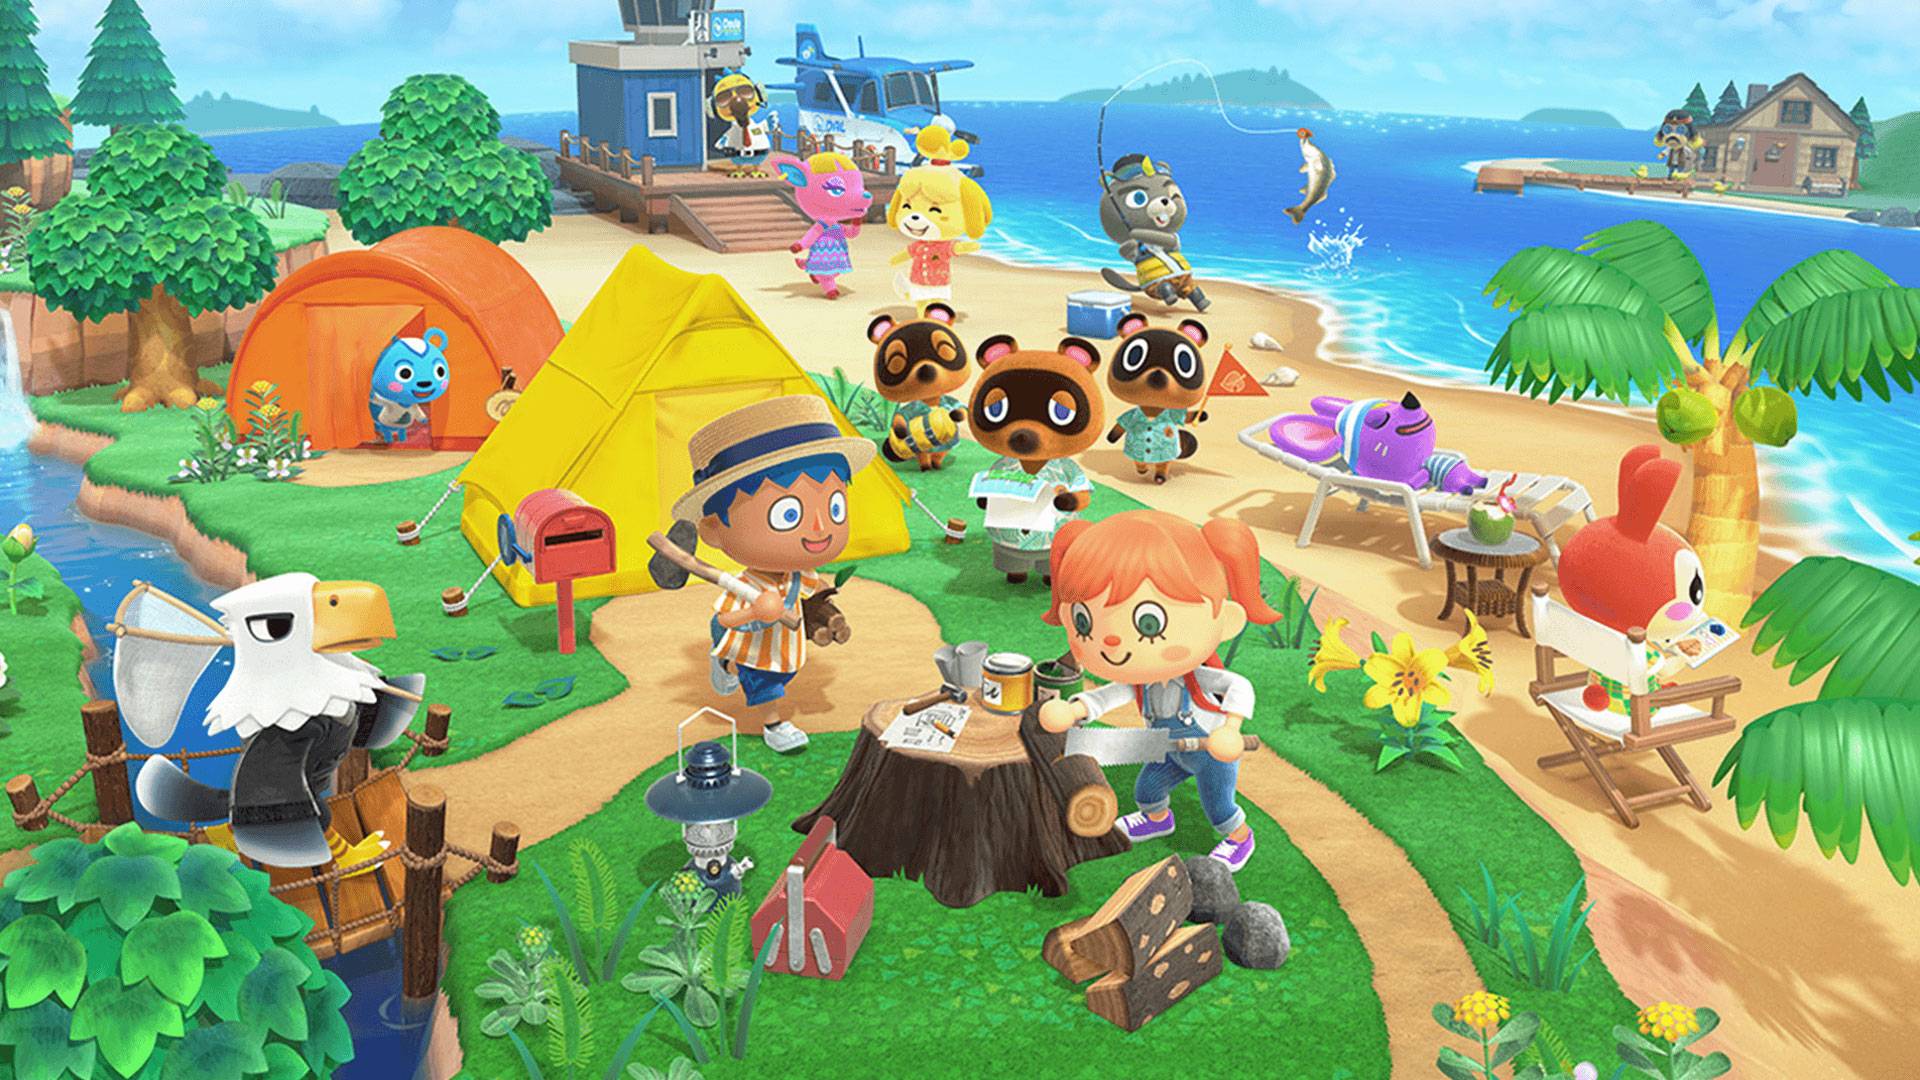 Key art shows an animal crossing villager doing DIY on a tree stump, while several animal characters stand around them contently 